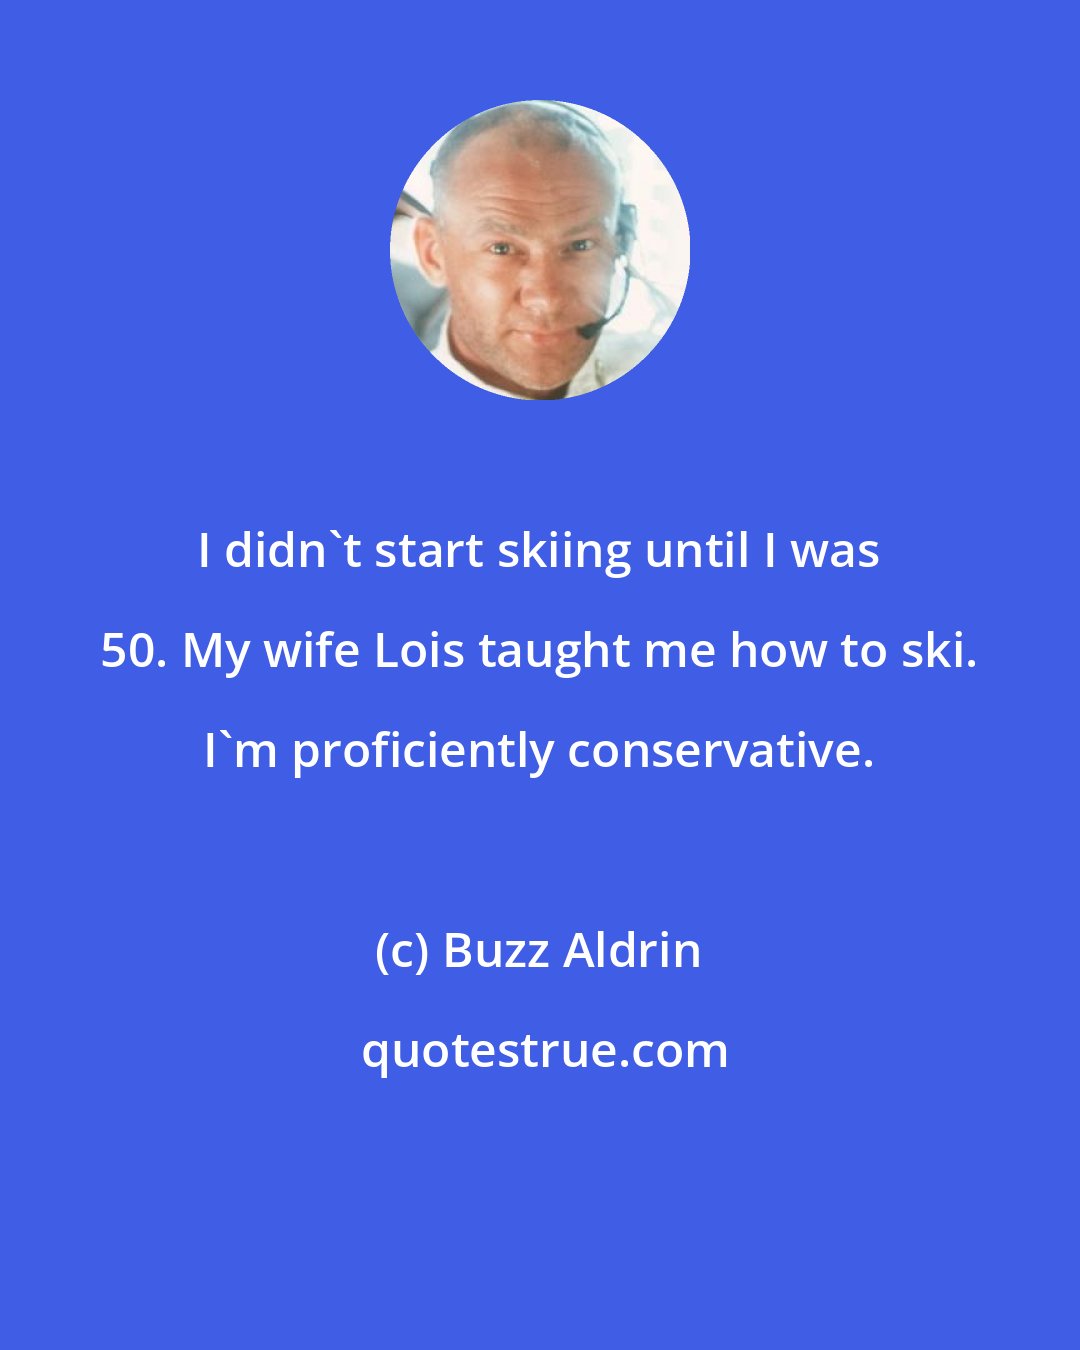 Buzz Aldrin: I didn't start skiing until I was 50. My wife Lois taught me how to ski. I'm proficiently conservative.